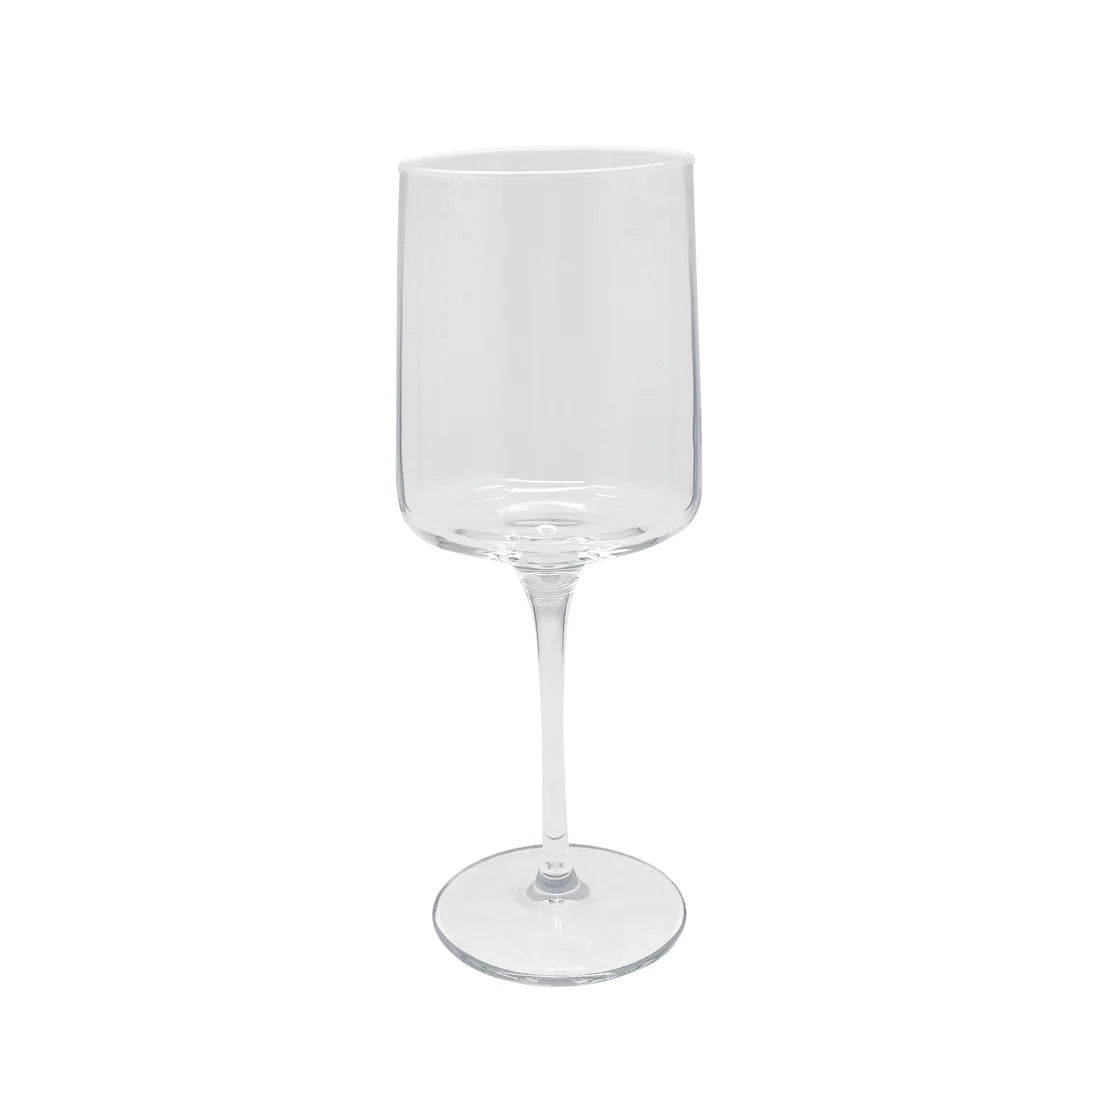 Fine Line Clear with White Rim Wine Glass Set of 4 - Gaines Jewelers